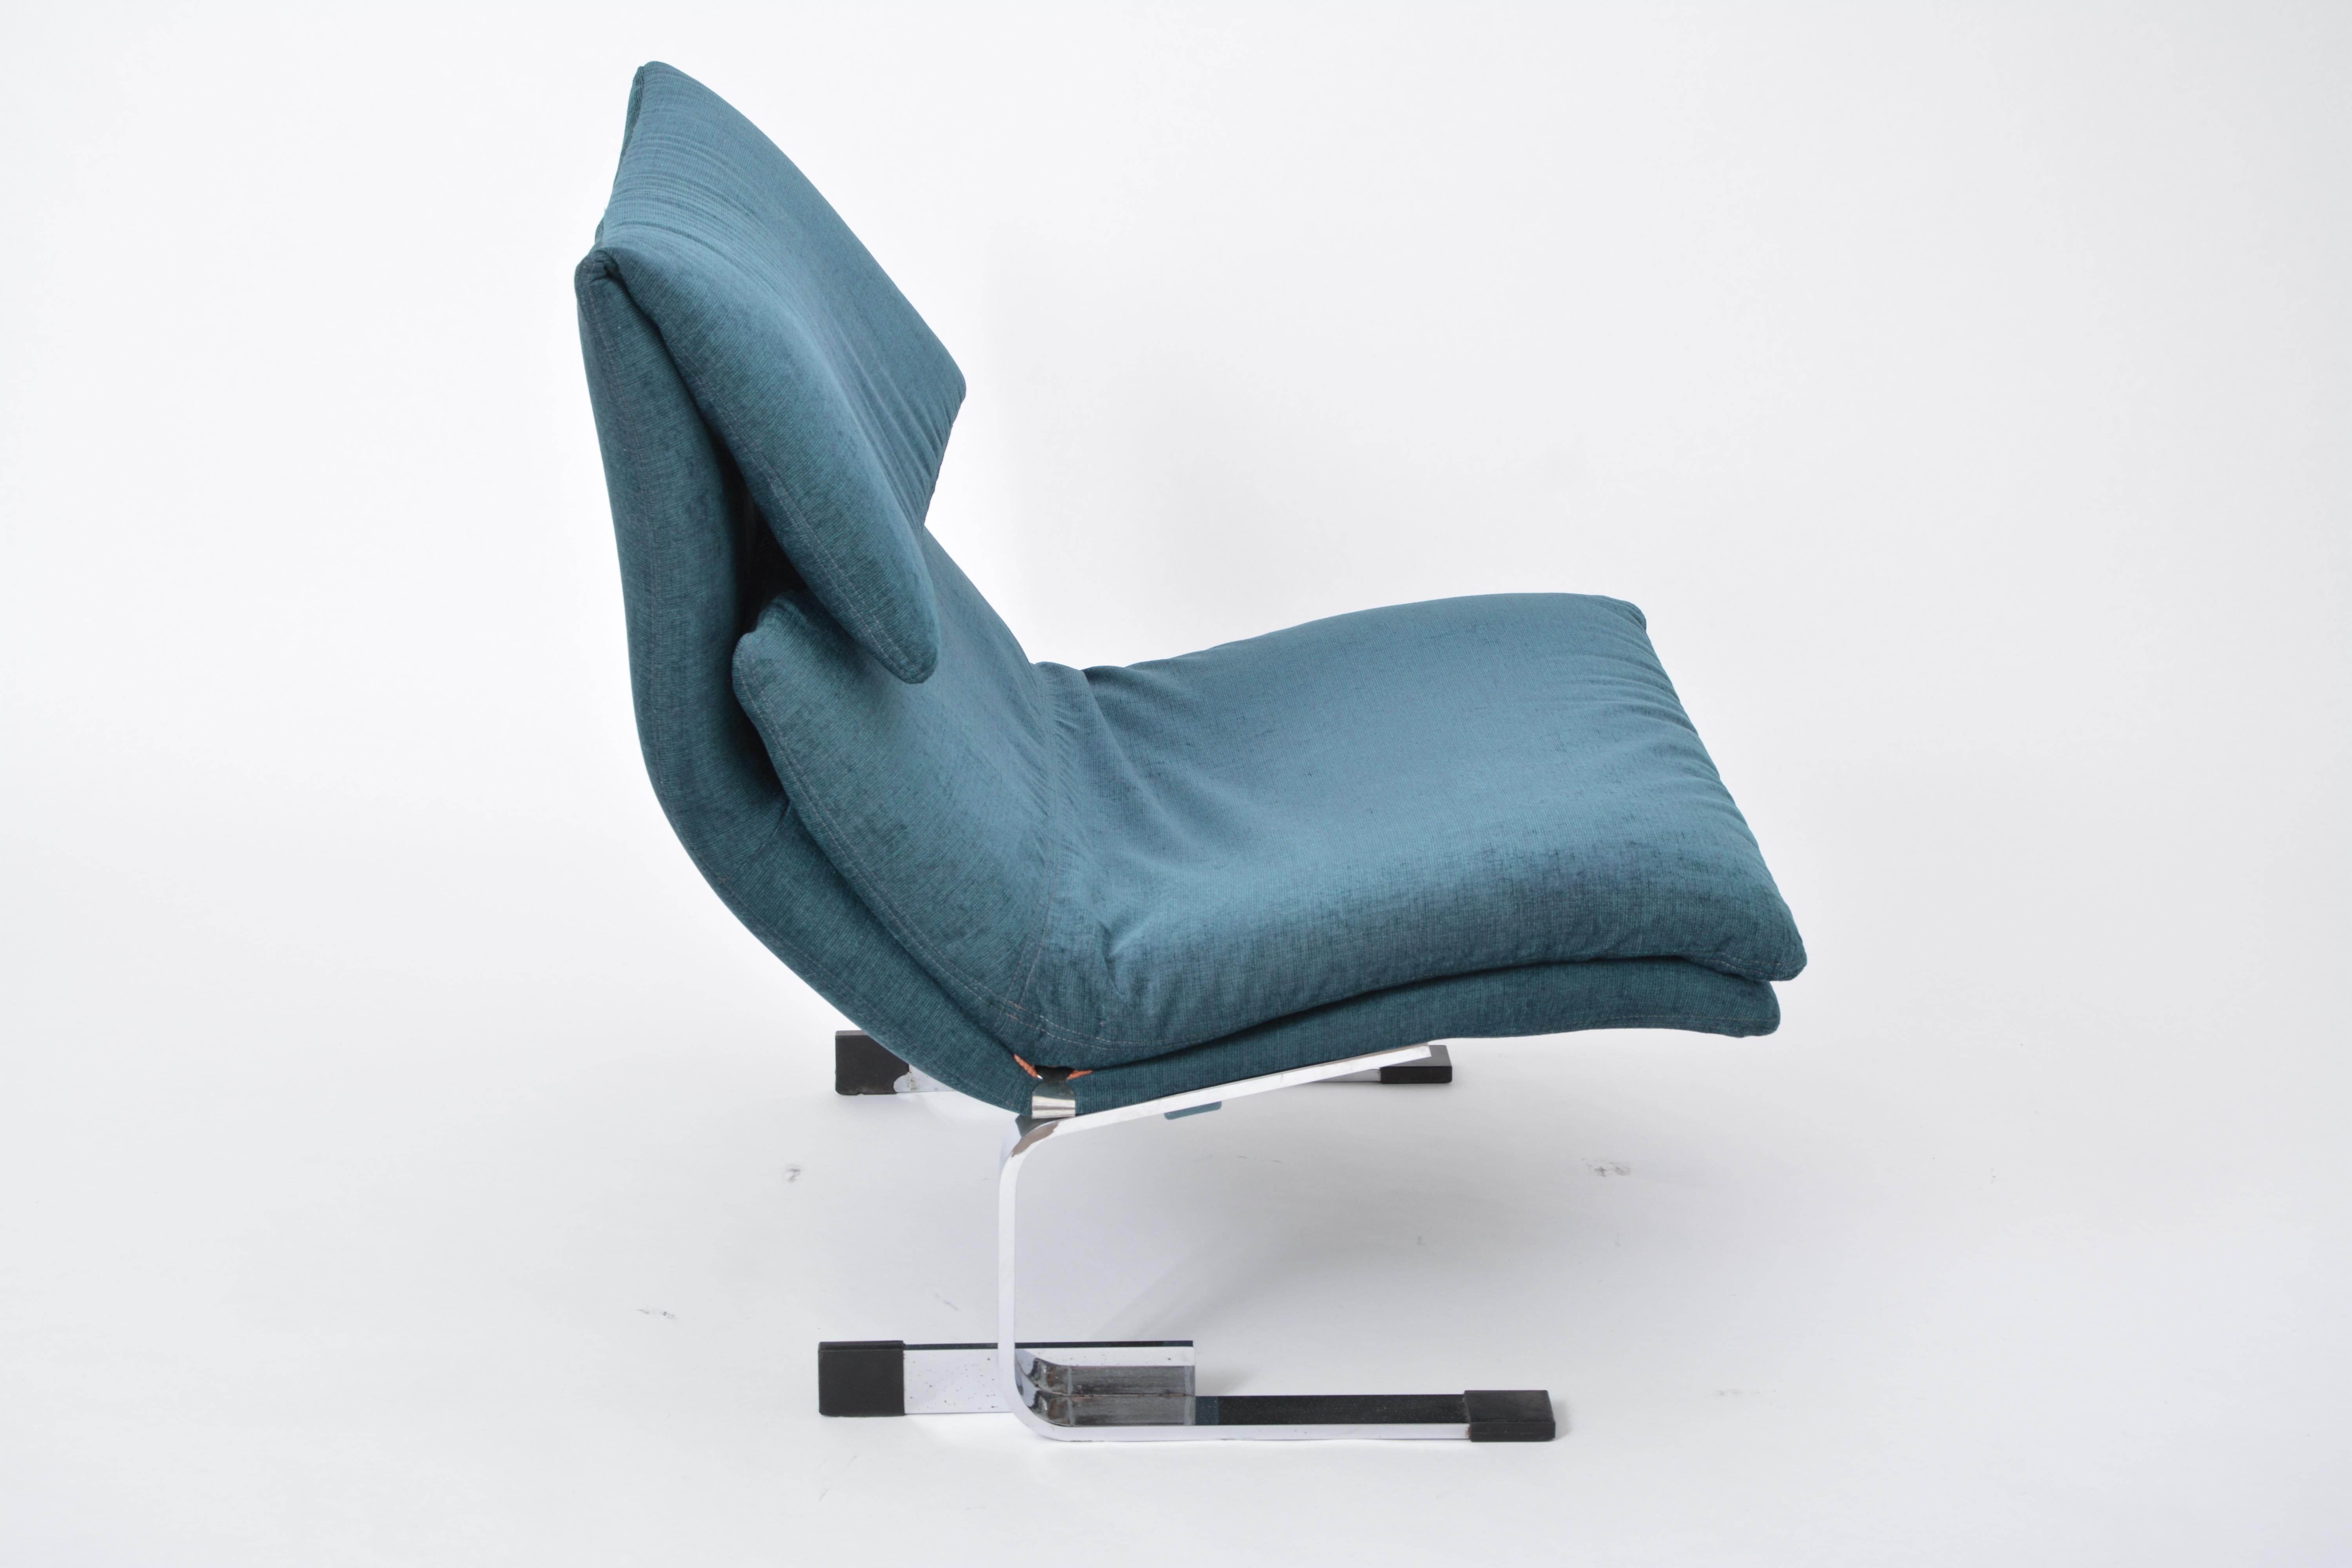 Reupholstered Post Modern Onda lounge chair by Giovanni Offredi for Saporiti

Produced in the 1970s, this Onda (Wave) chair was designed by Giovanni Offredi as part of his Onda series for Saporiti Italia. This very comfortable lounge chair has a